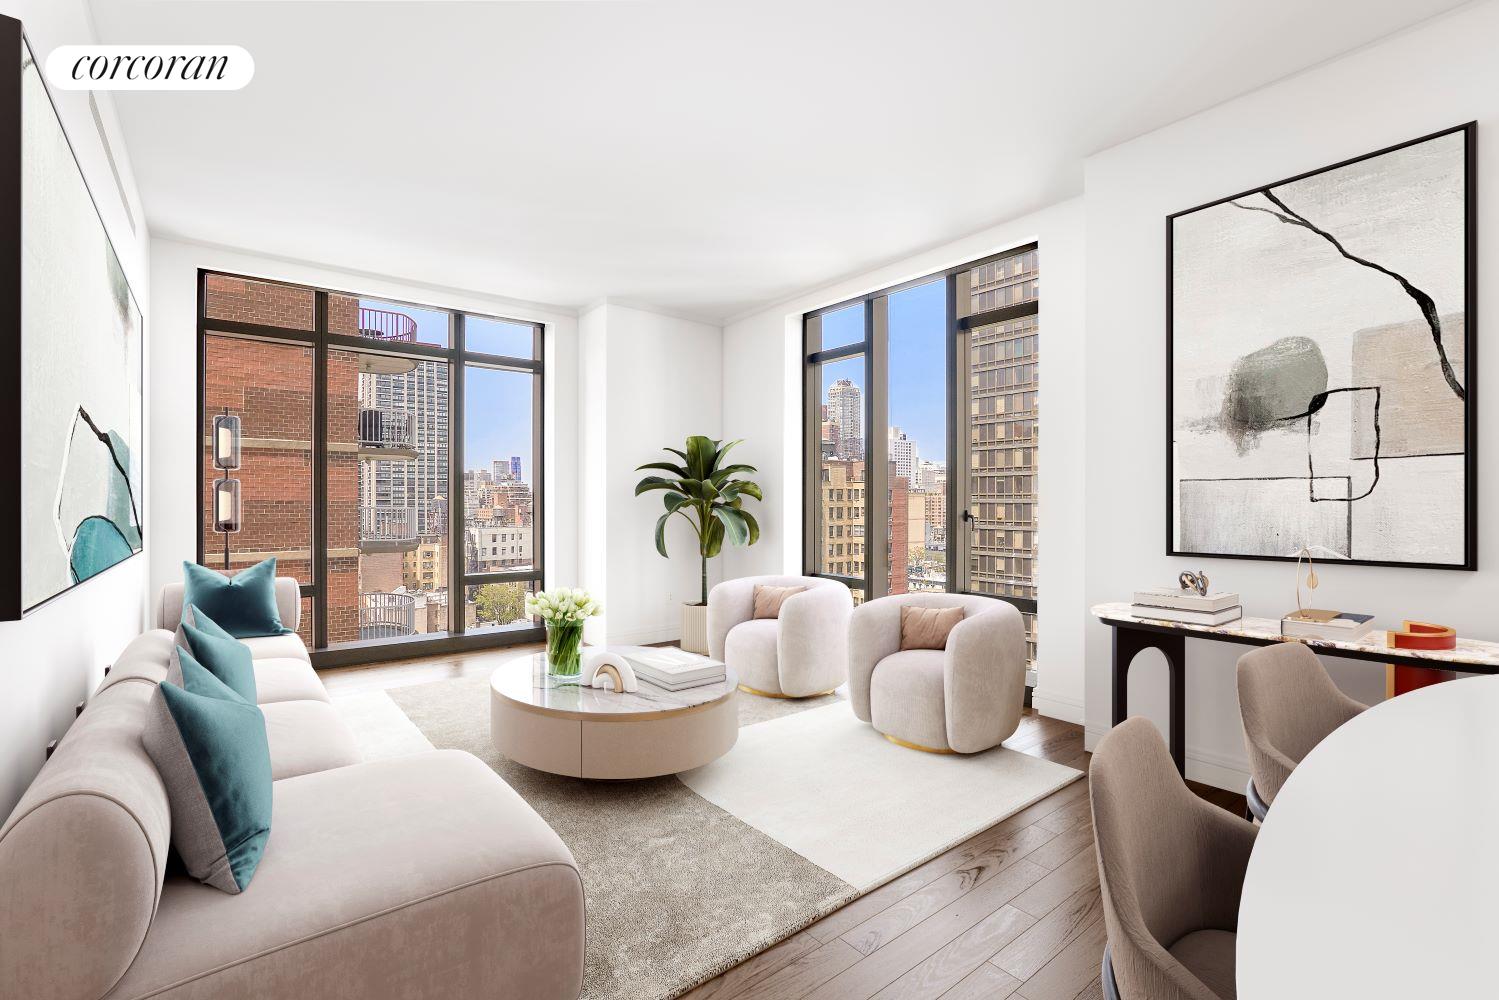 430 East 58th Street 16B, Sutton, Midtown East, NYC - 2 Bedrooms  
2.5 Bathrooms  
4 Rooms - 